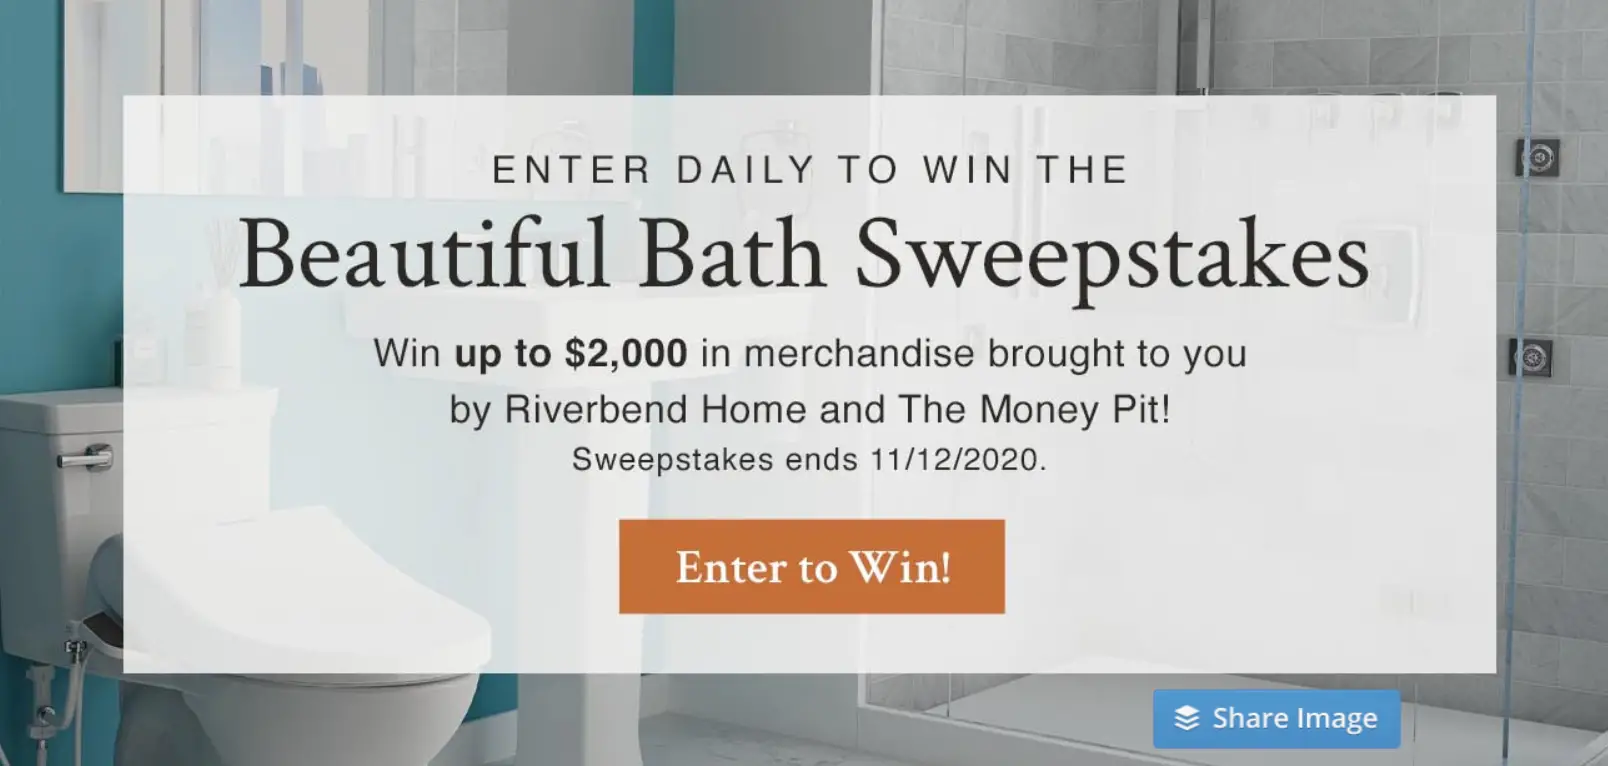 Enter Money Pit’s Riverbend Home Beautiful Bath Sweepstakes for your chance to win $3,500 worth of bath products from American Standard and Grohe! #GiveawayAlert Select from beautiful fixtures, faucets and more that deliver on style, sustainability and performance!